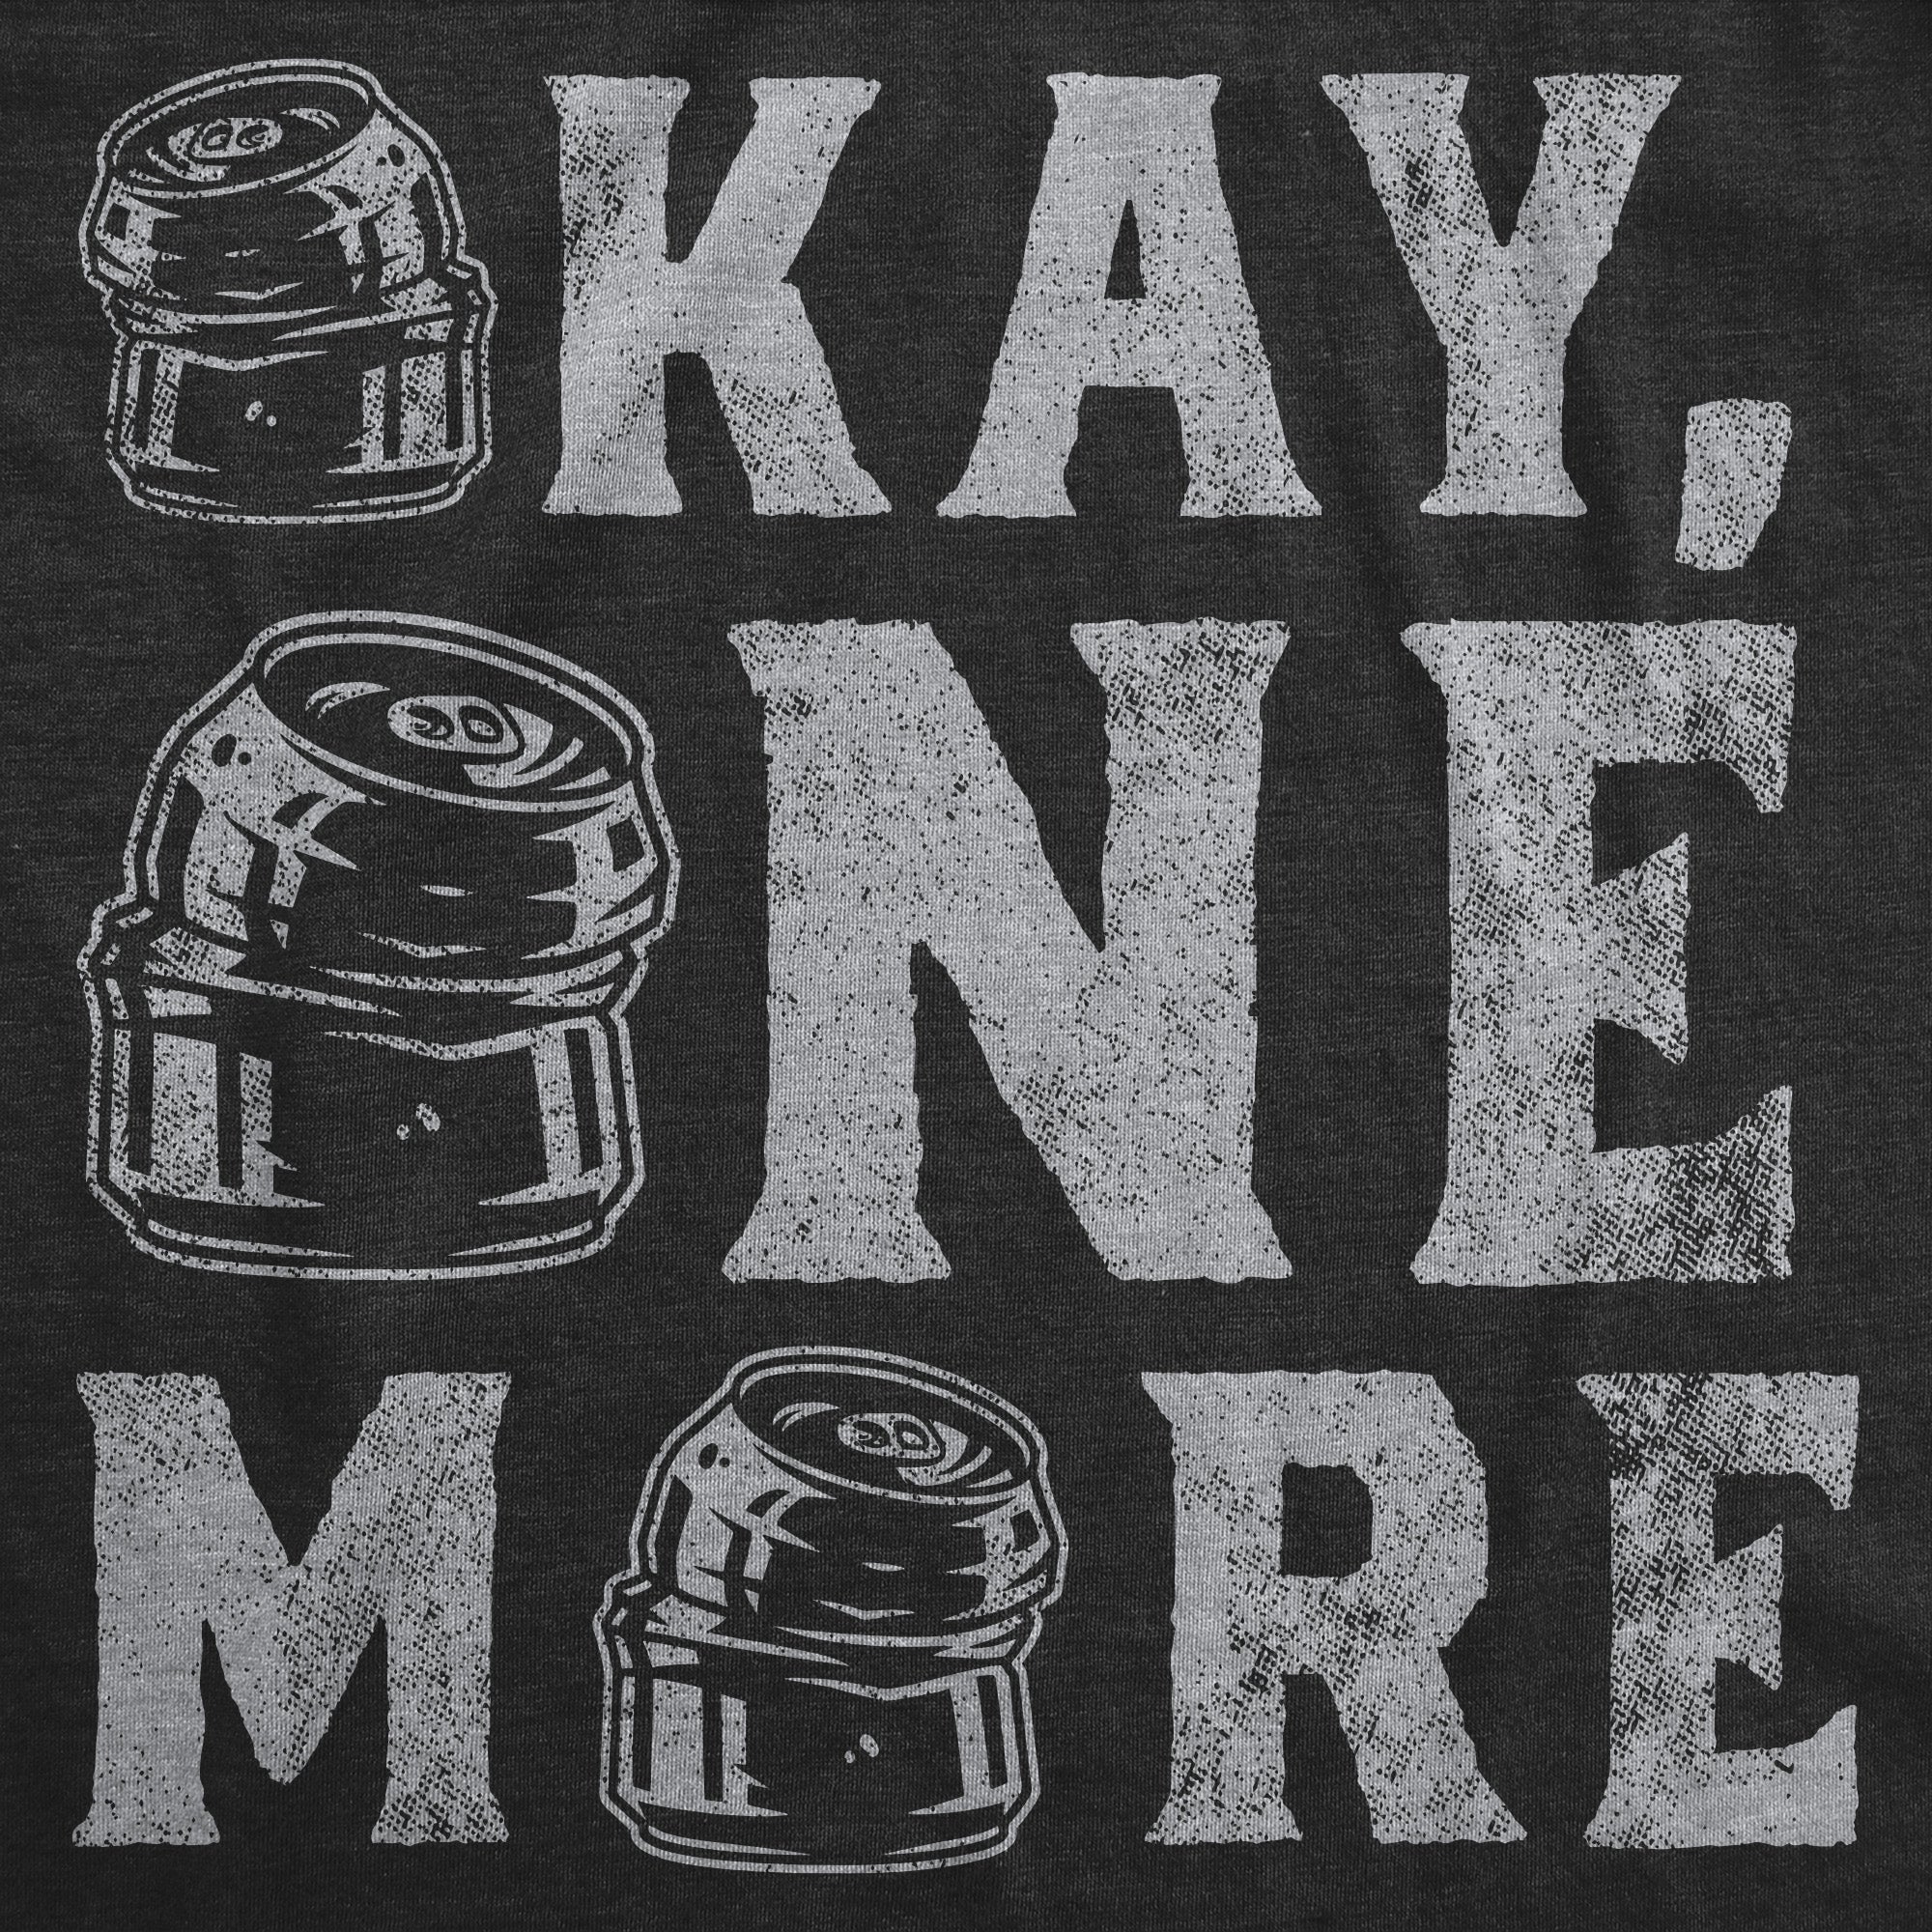 Funny Heather Black - Okay One More Okay One More Womens T Shirt Nerdy Beer Drinking Tee